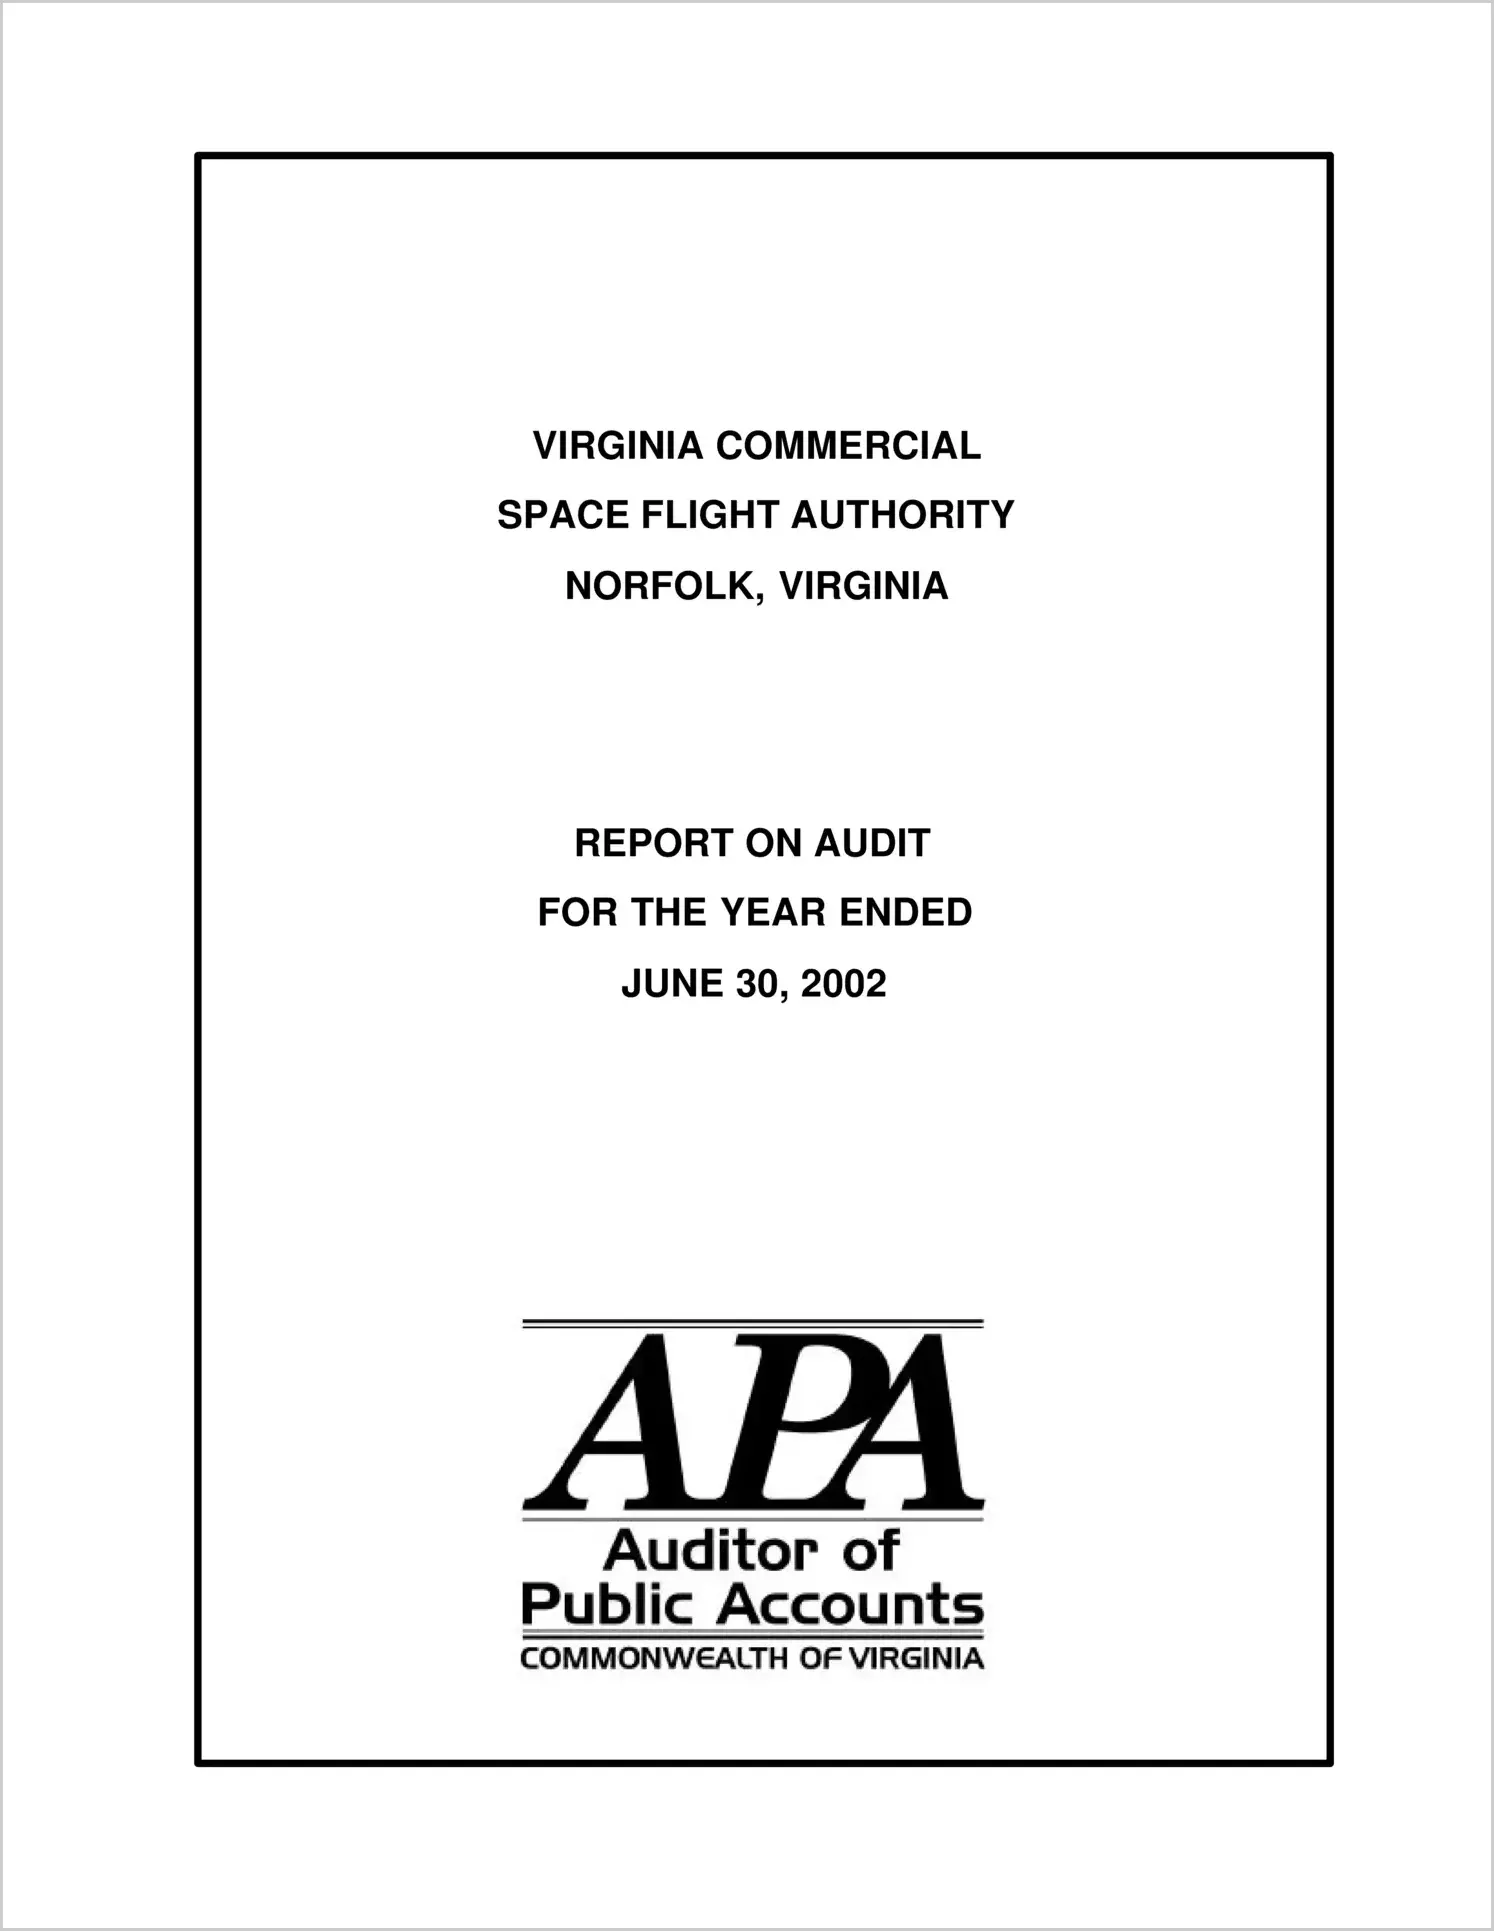 Virginia Commercial Space Flight Authority for the year ended June 30, 2002